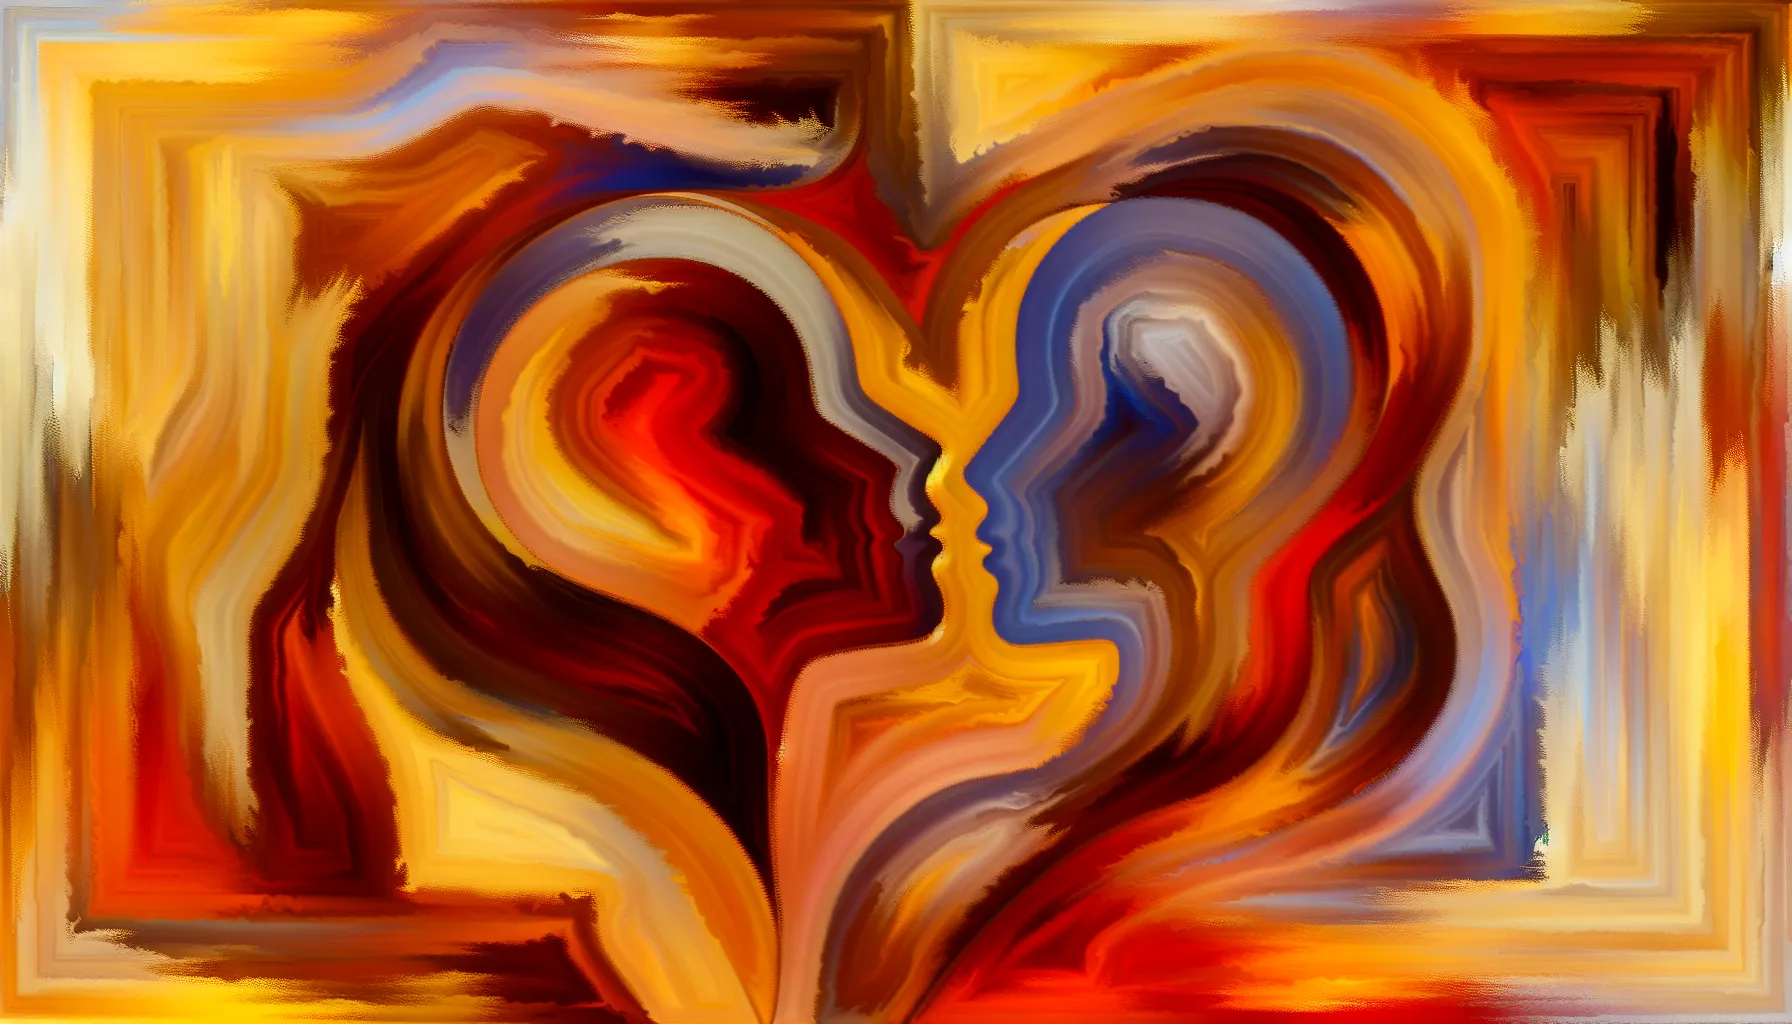 In the kaleidoscope of emotions, love weaves its own narrative, binding the threads of passion and intimacy with delicate precision. <strong>Explore the labyrinth of affection</strong> where each turn reflects a shared history, a promise of growth, and the enduring power of an emotional connection.